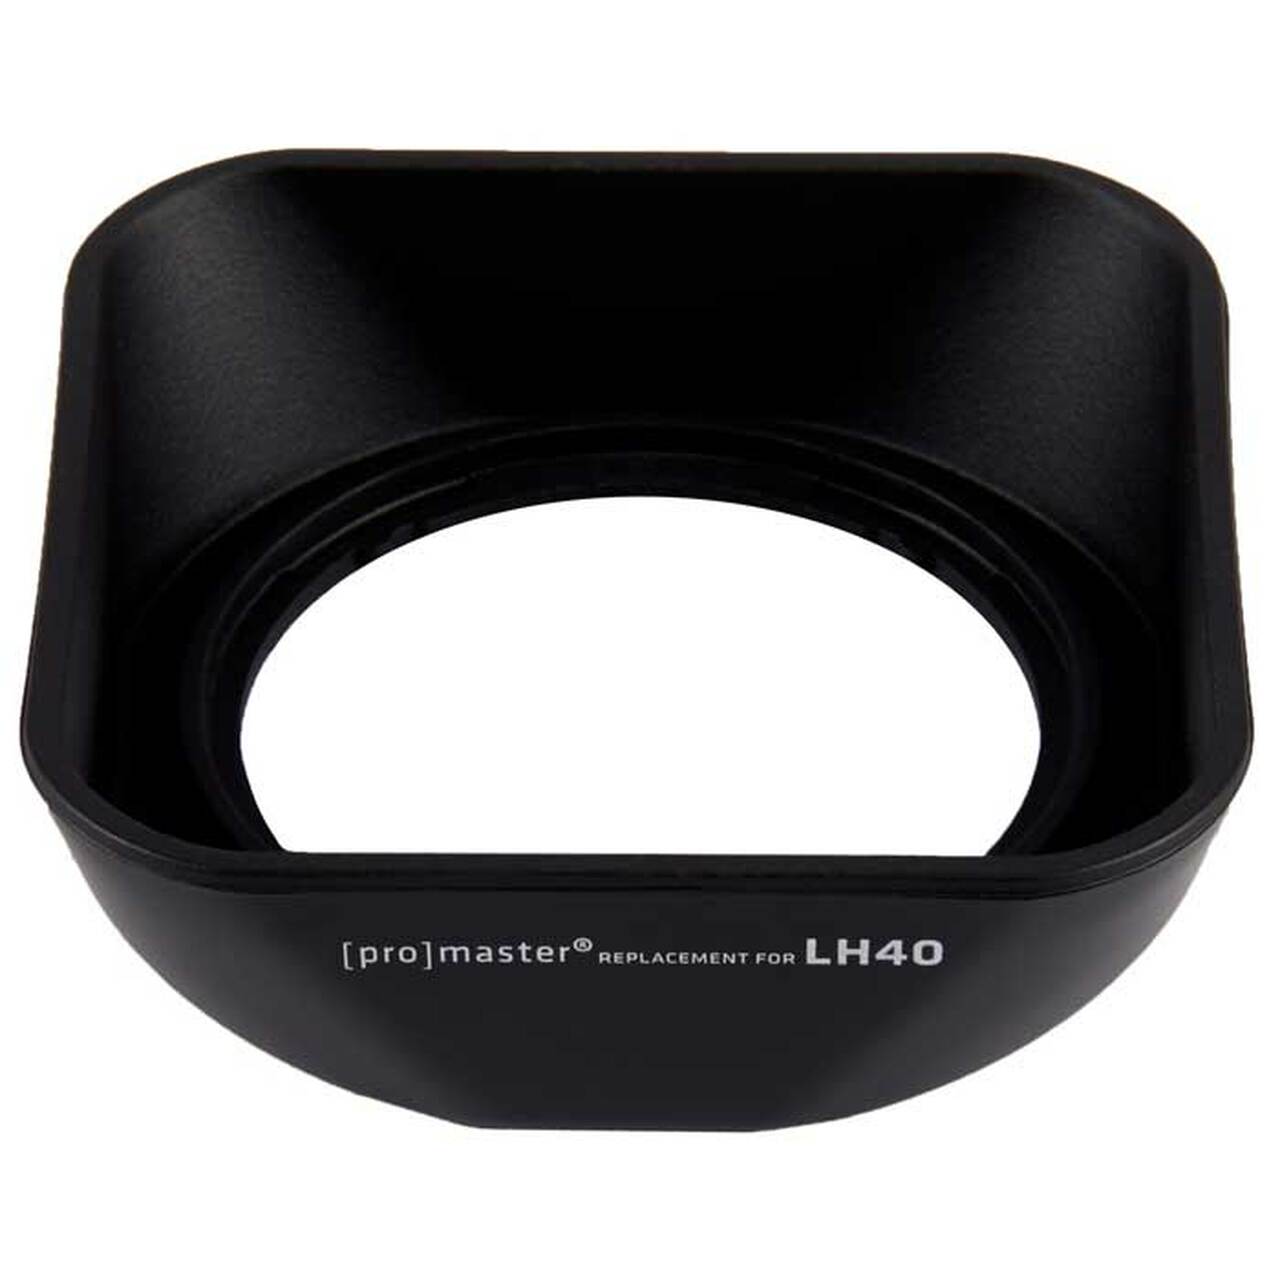 Promaster 6284 LH40 Hood for Olympus